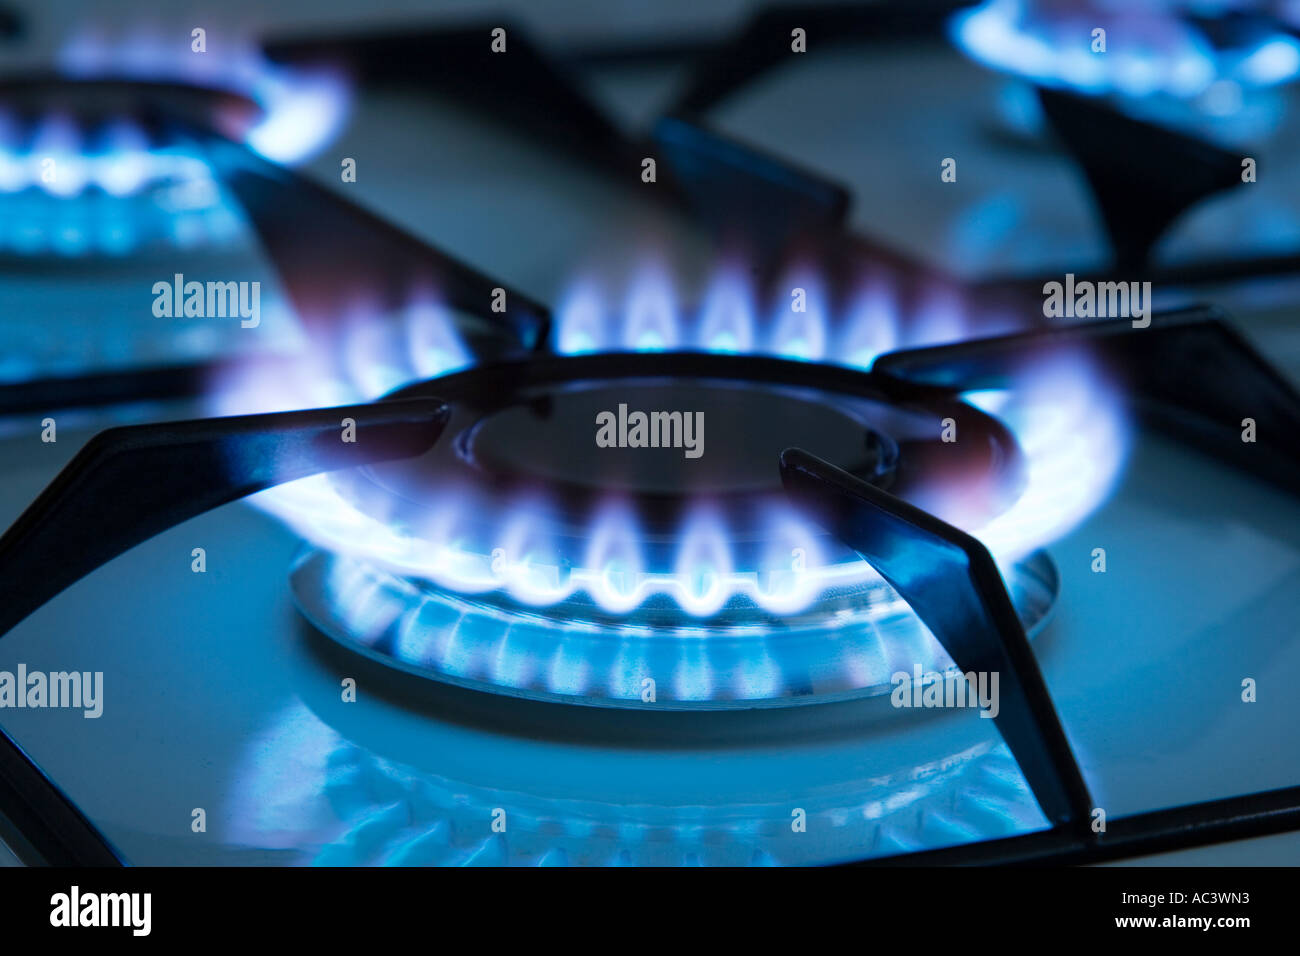 gas flames on a ring Stock Photo